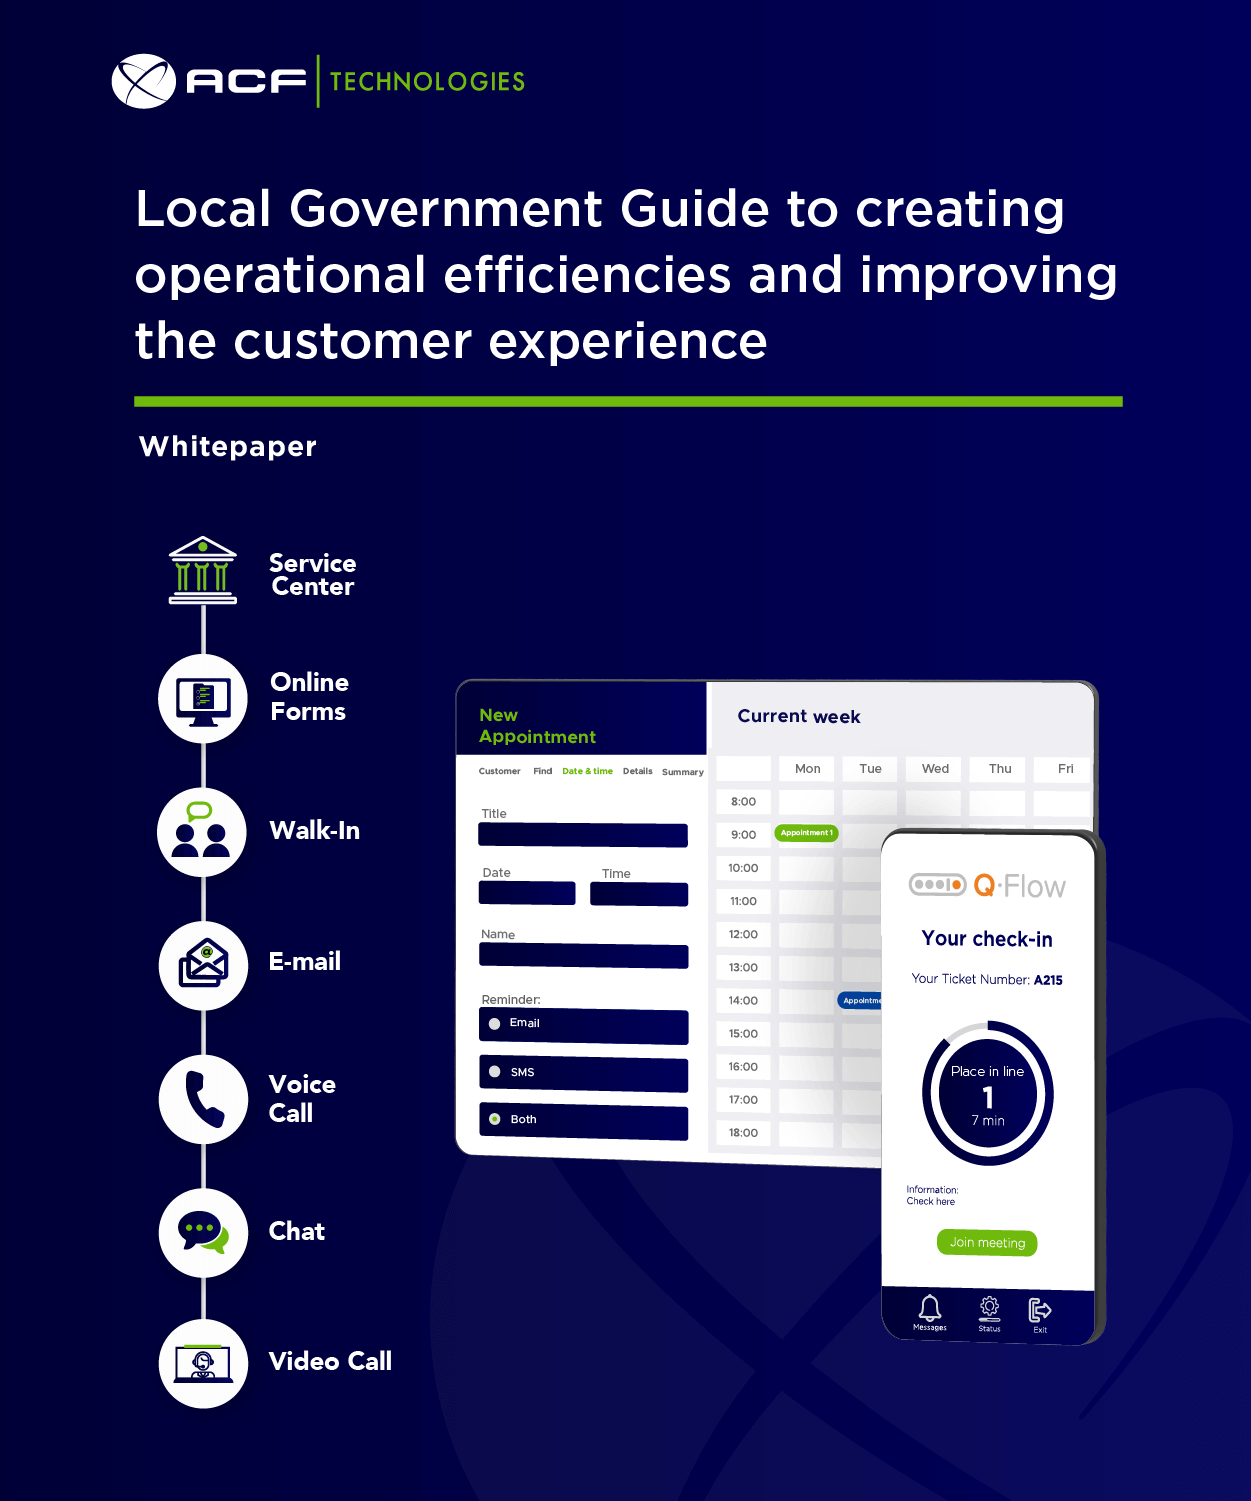 Local Government Guide to creating operational efficiencies and improving CX, front page